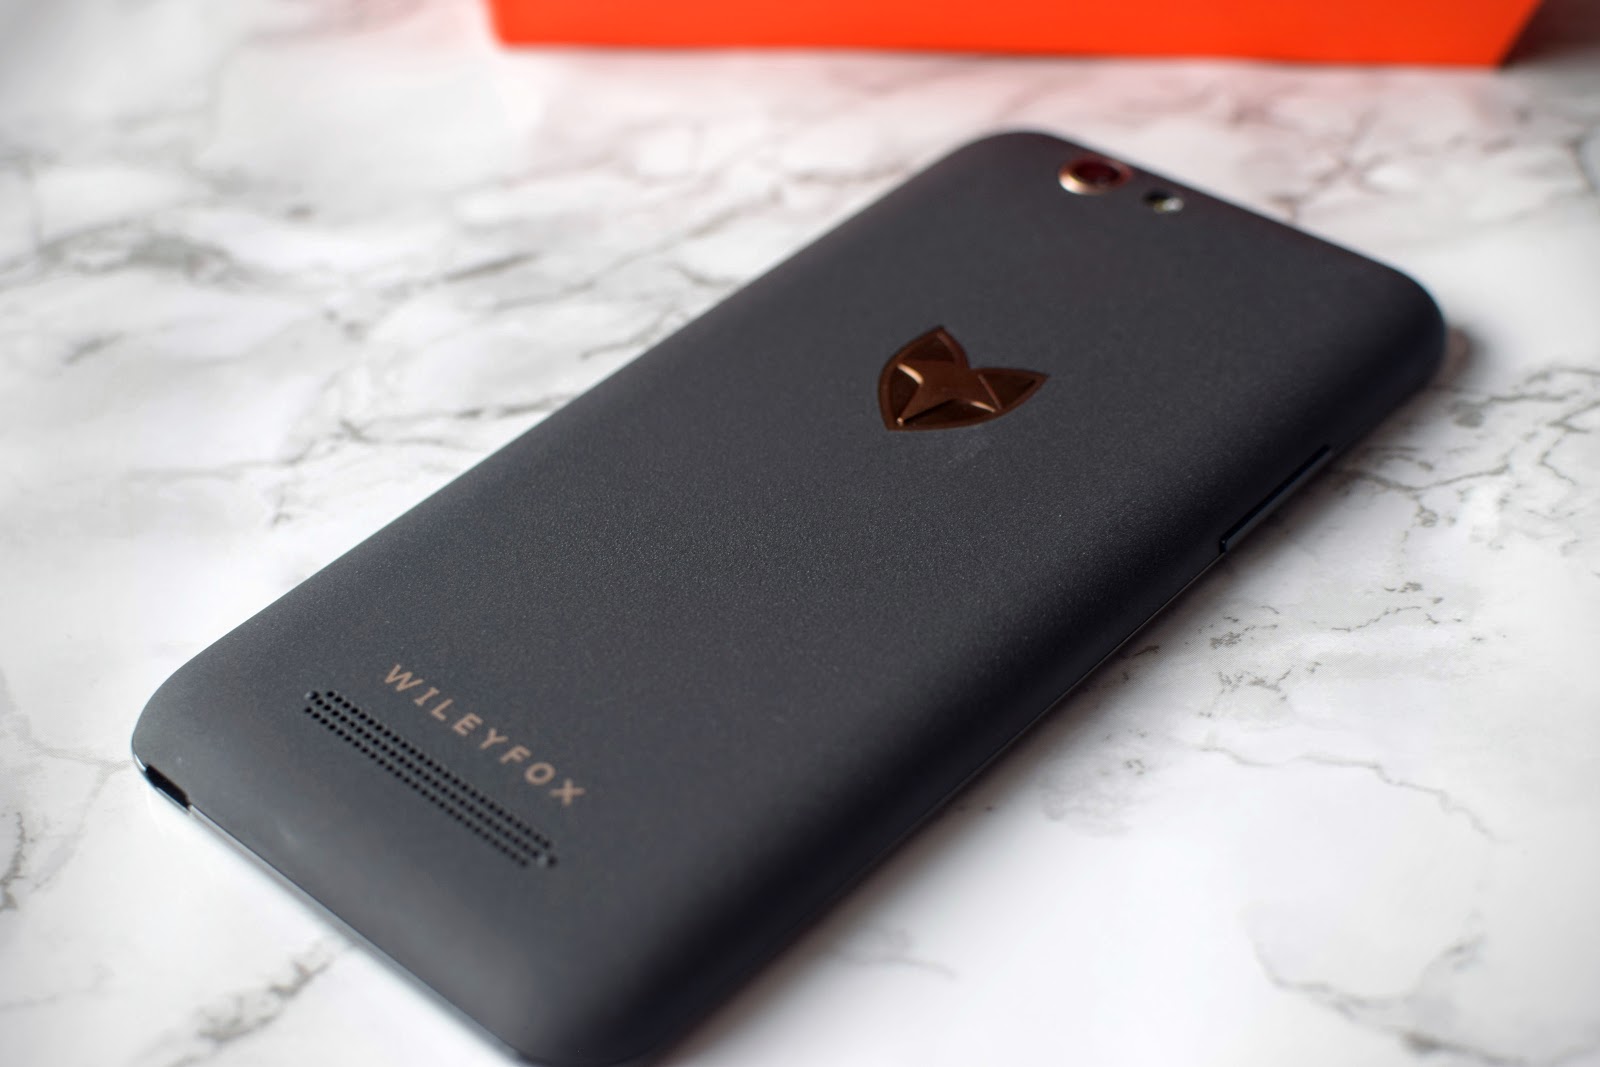 , Children and Phones / The Wileyfox- Spark + #Review